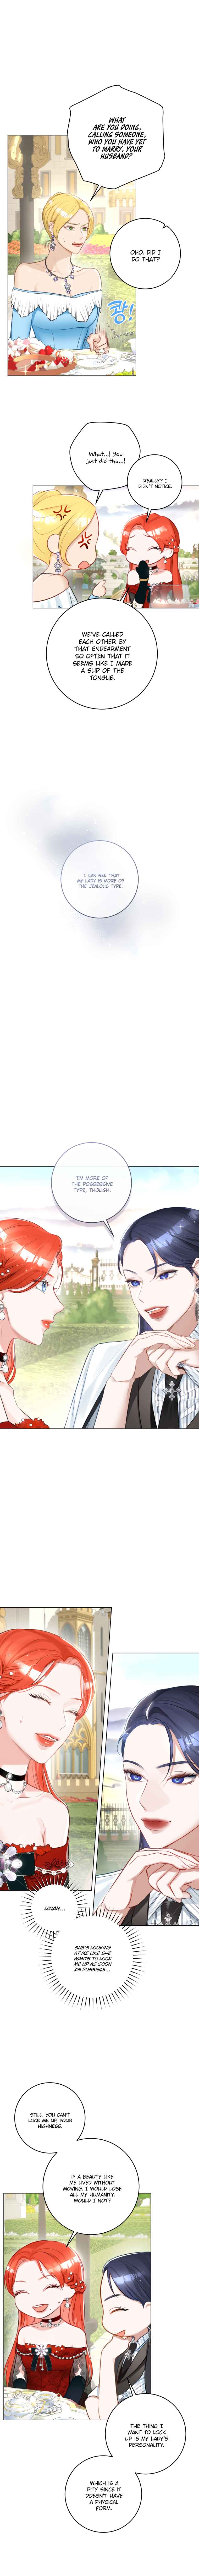 The Archduke’s Gorgeous Wedding Was a Fraud chapter 12